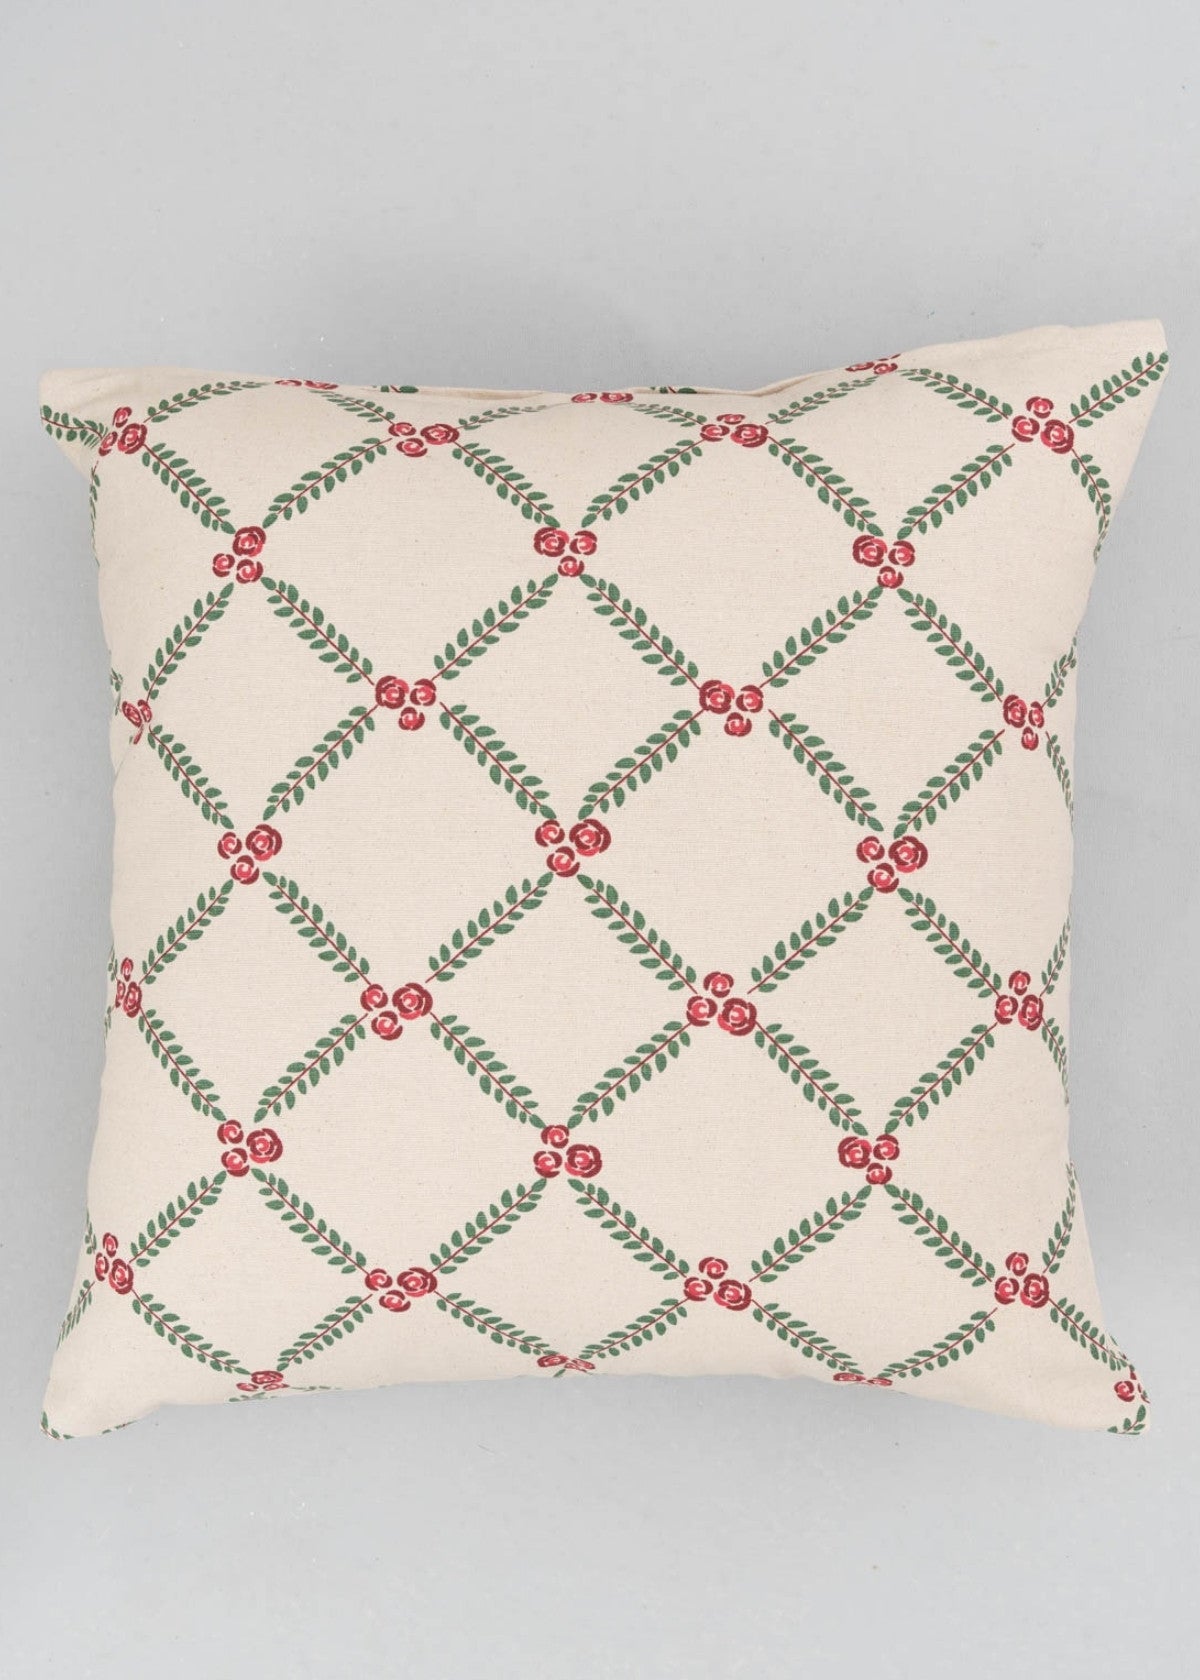 Climbing Roses Printed Cotton Cushion Cover - Wine Red